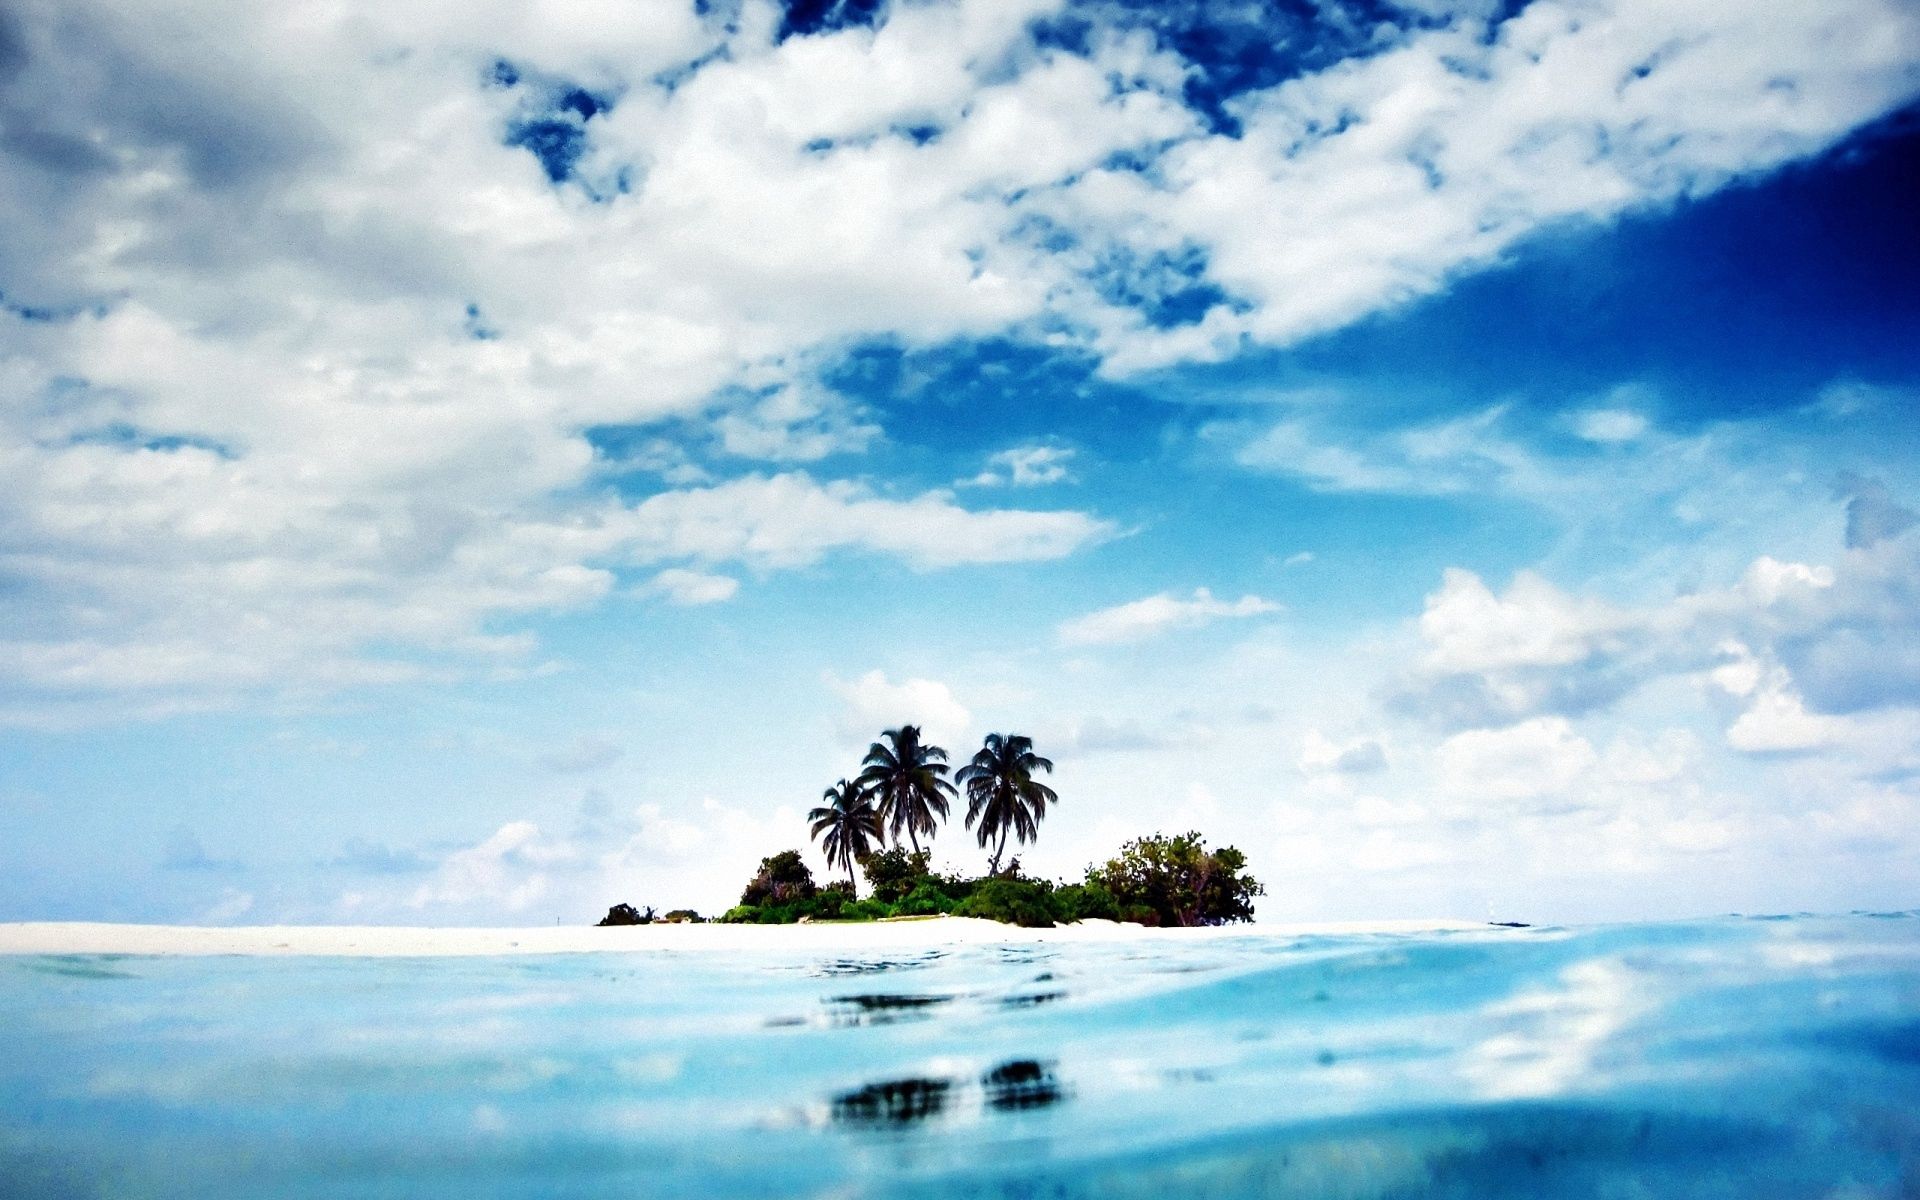 blue water, nature, sky, sea, clouds, palms, land, island, clear, i see, uninhabited